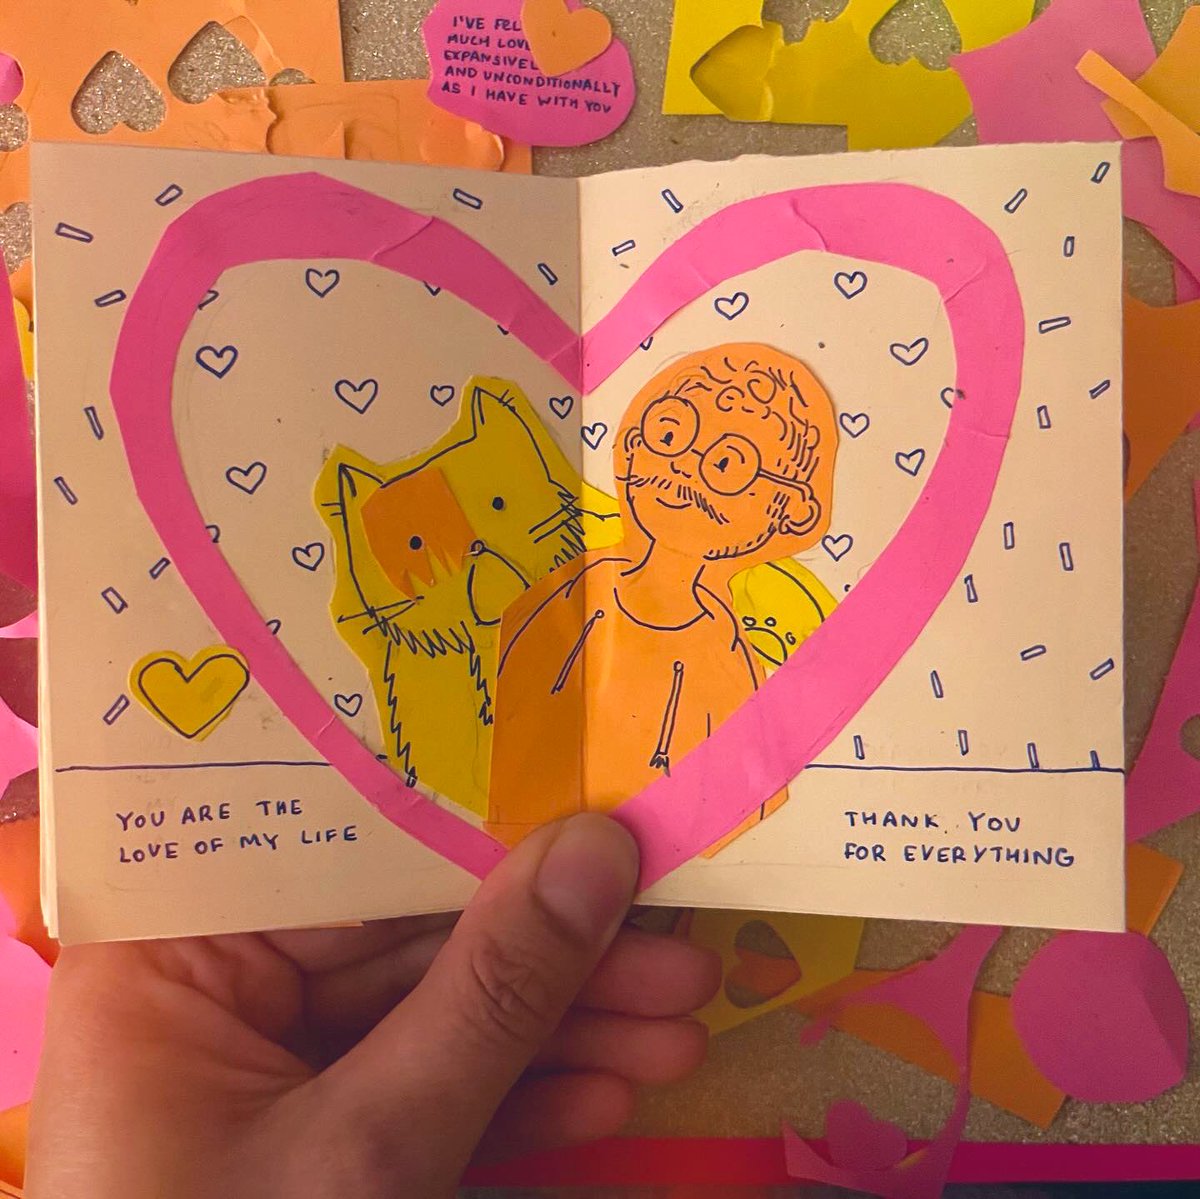 Happy Valentines Day. Last night I spent it illustrating and collaging a little zine for the love of my life, going to get her breakfast now and give this to her later this morning 💖🧡💛